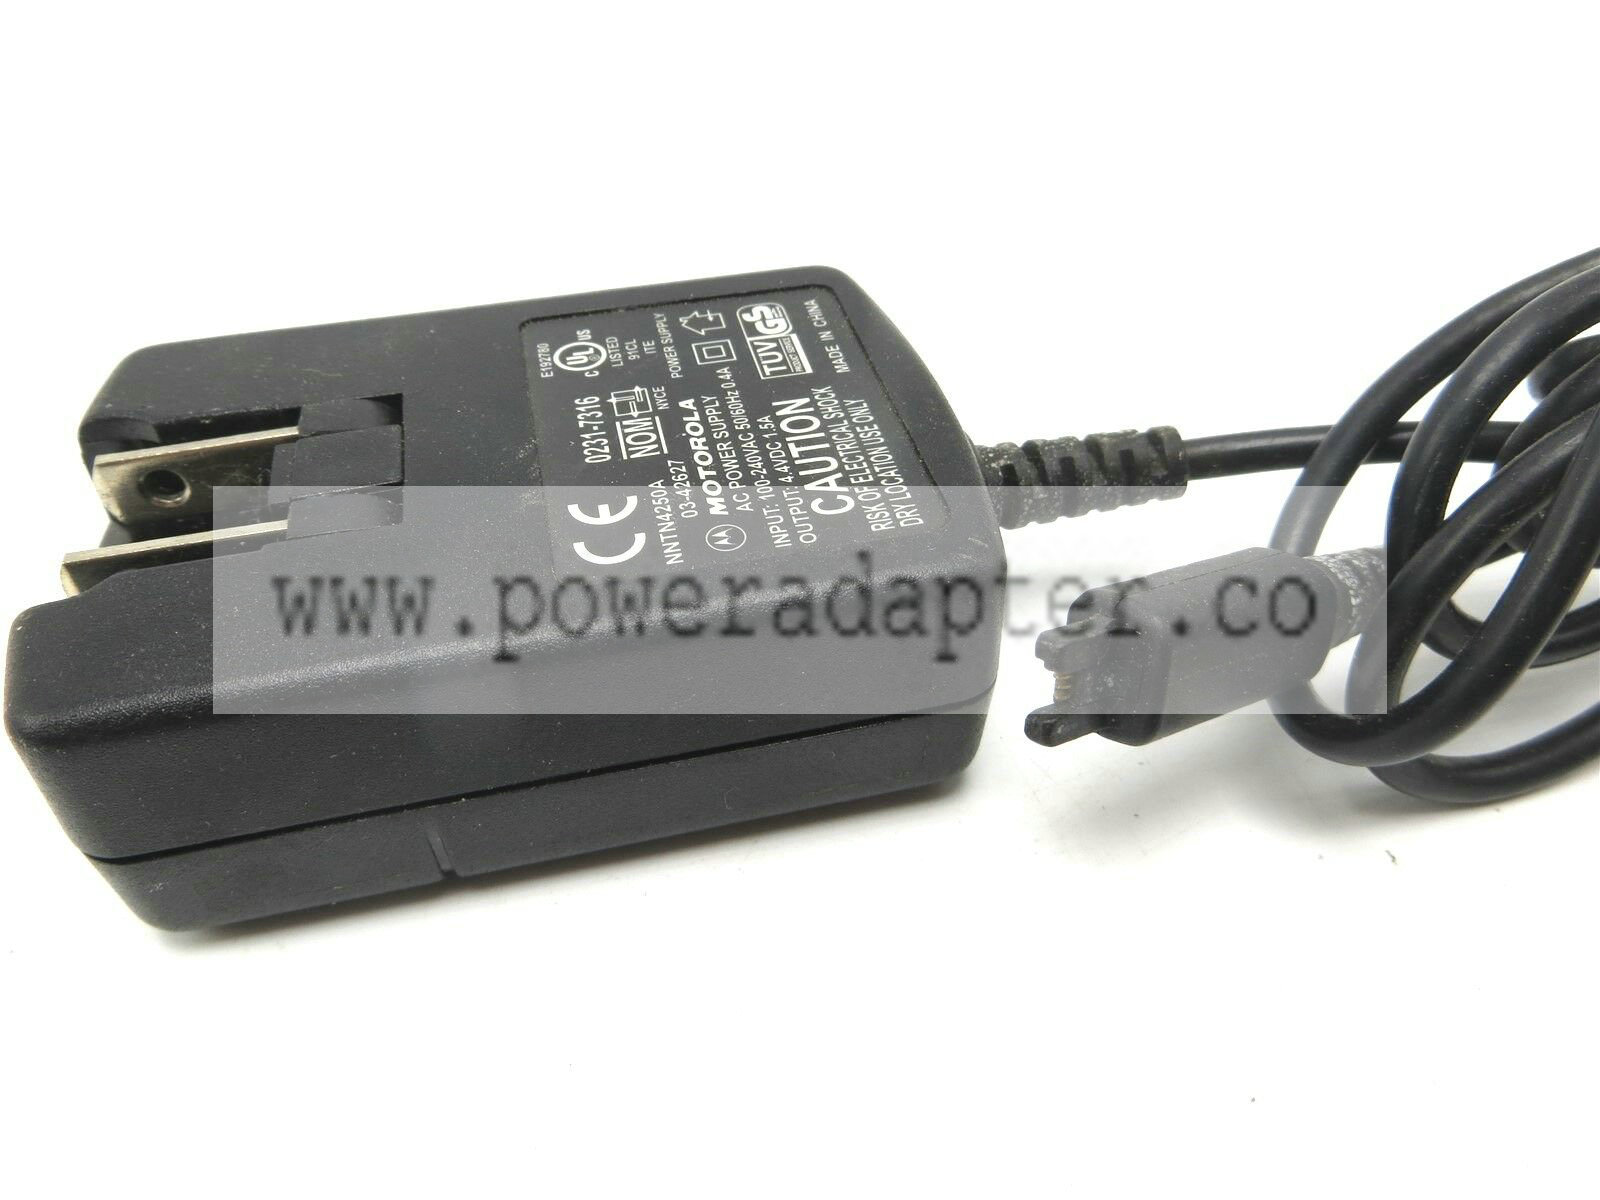 Motorola AC Power Supply Adapter Output 4.4VDC 1.5A Motorola AC Power Supply Adapter Output 4.4VDC 1.5A. In good cond